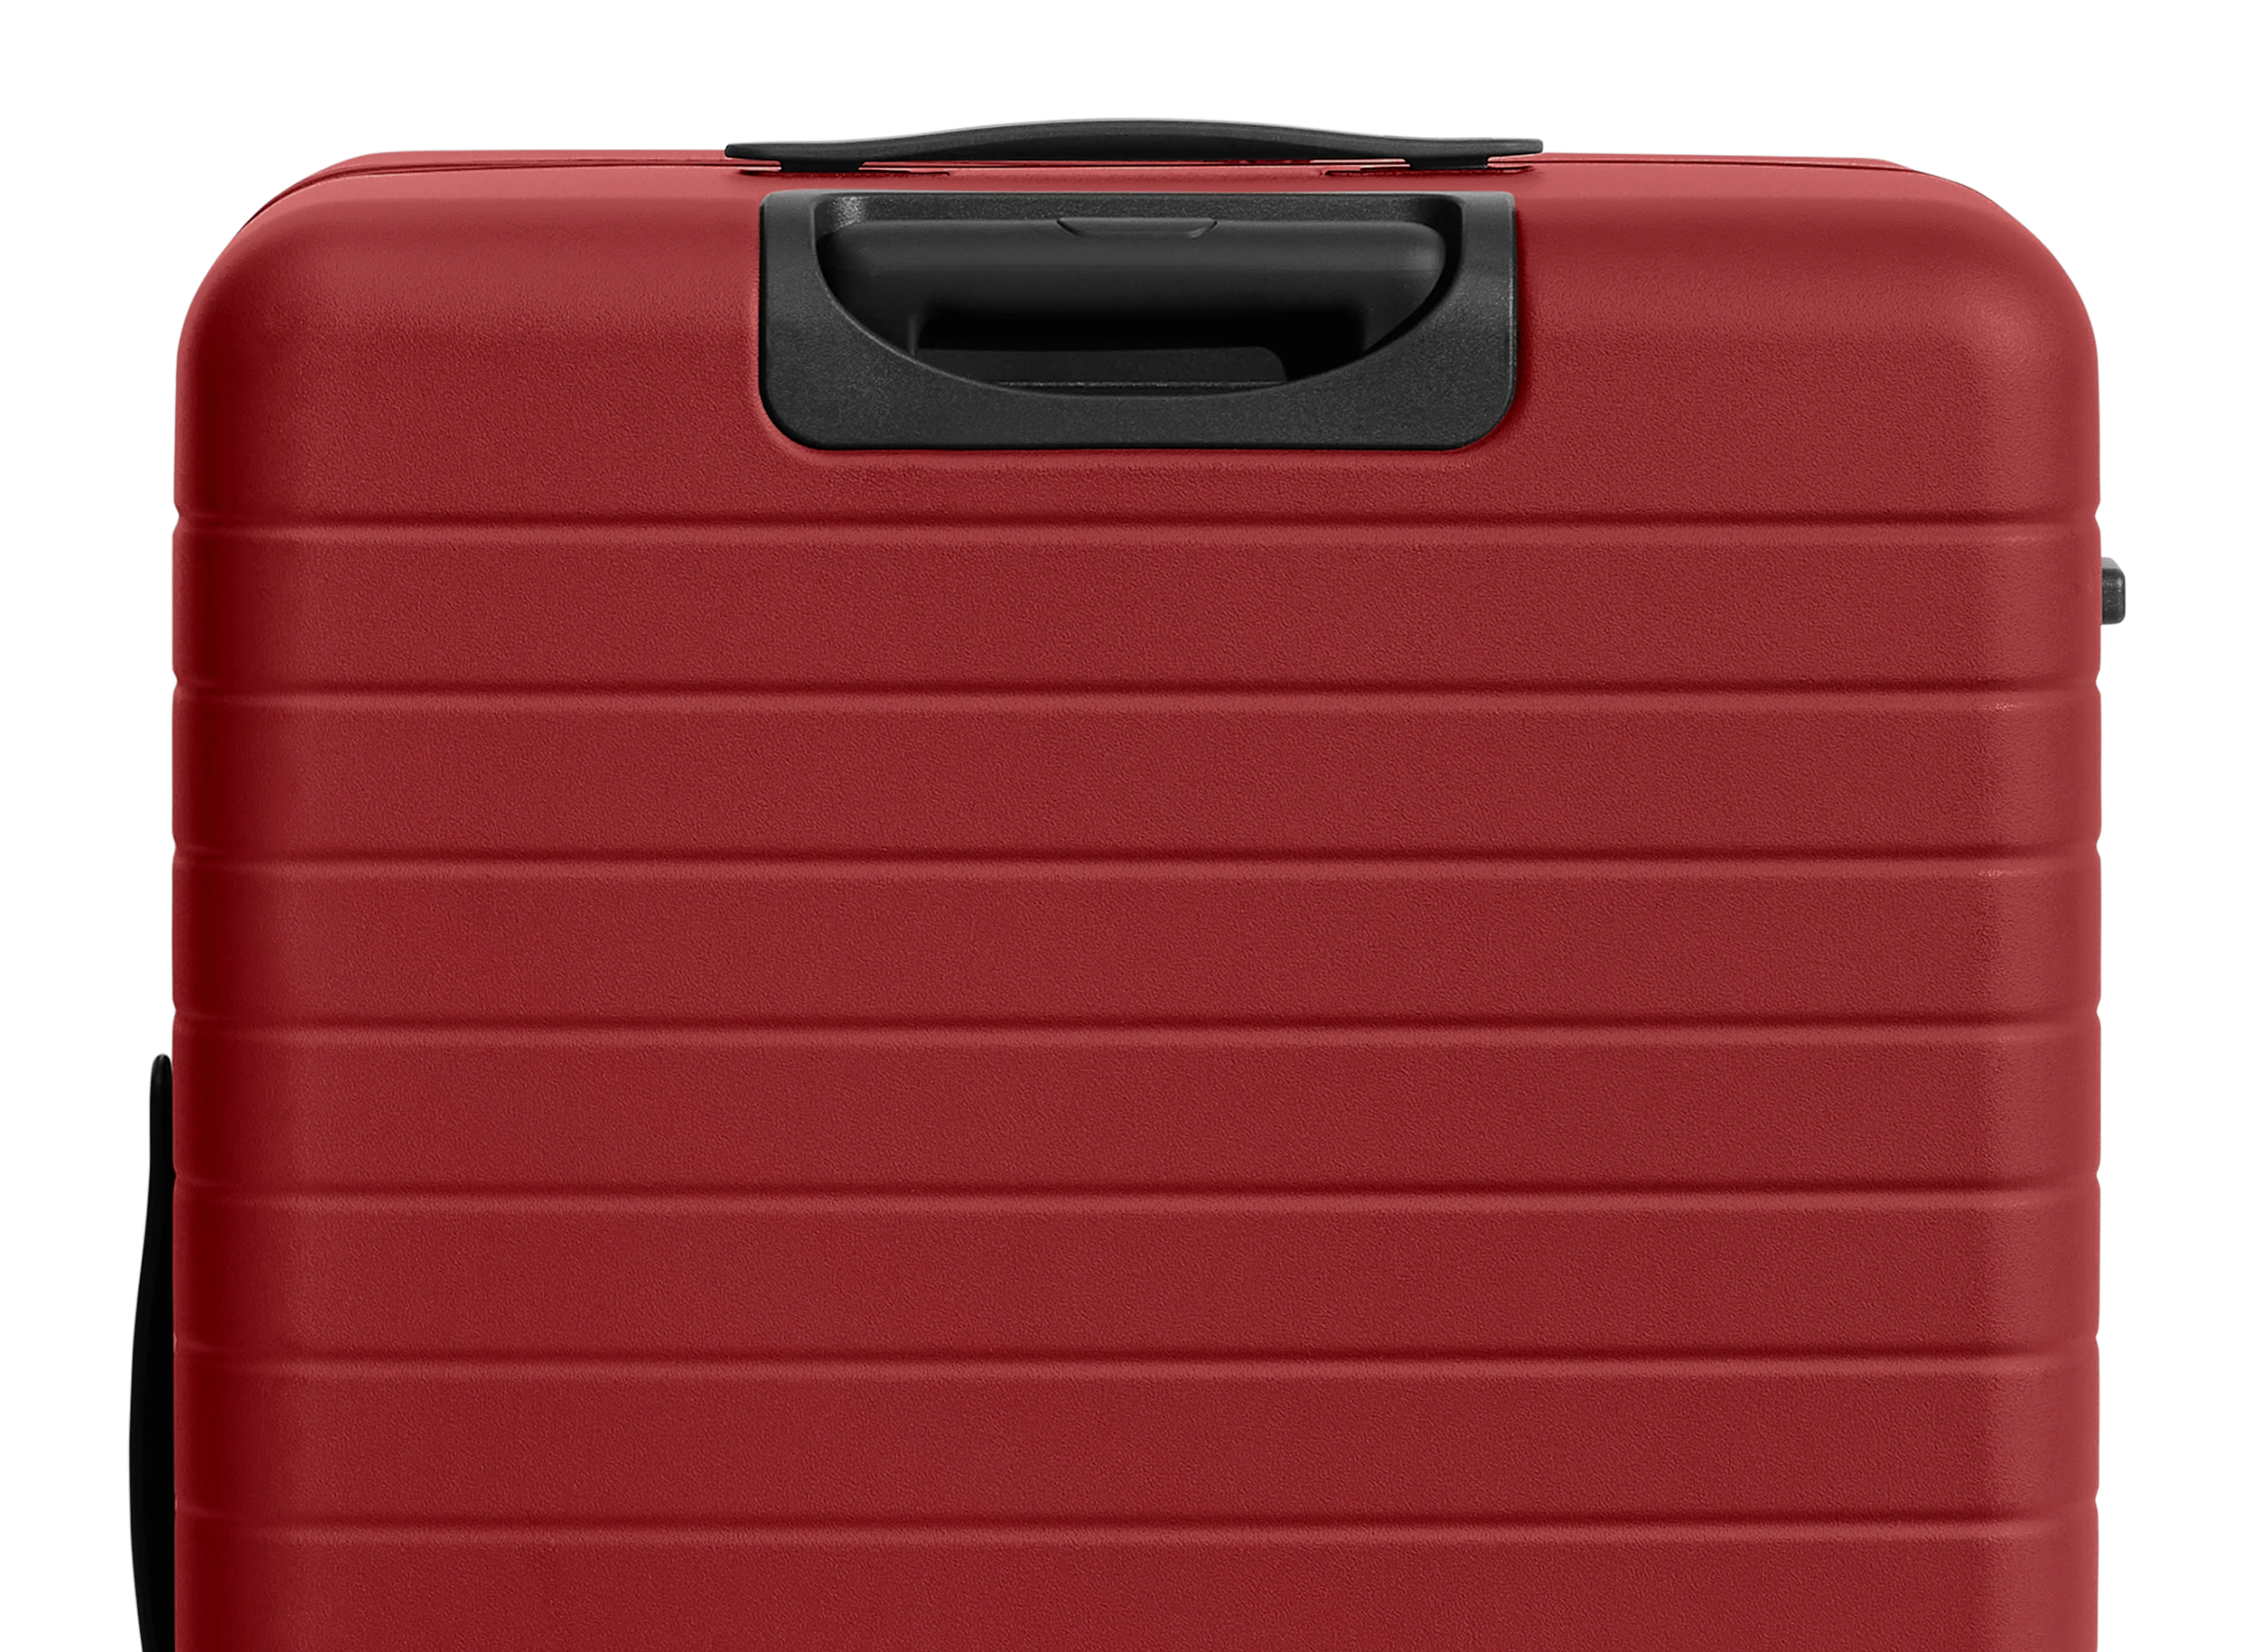 The Large Flex in Tango Red